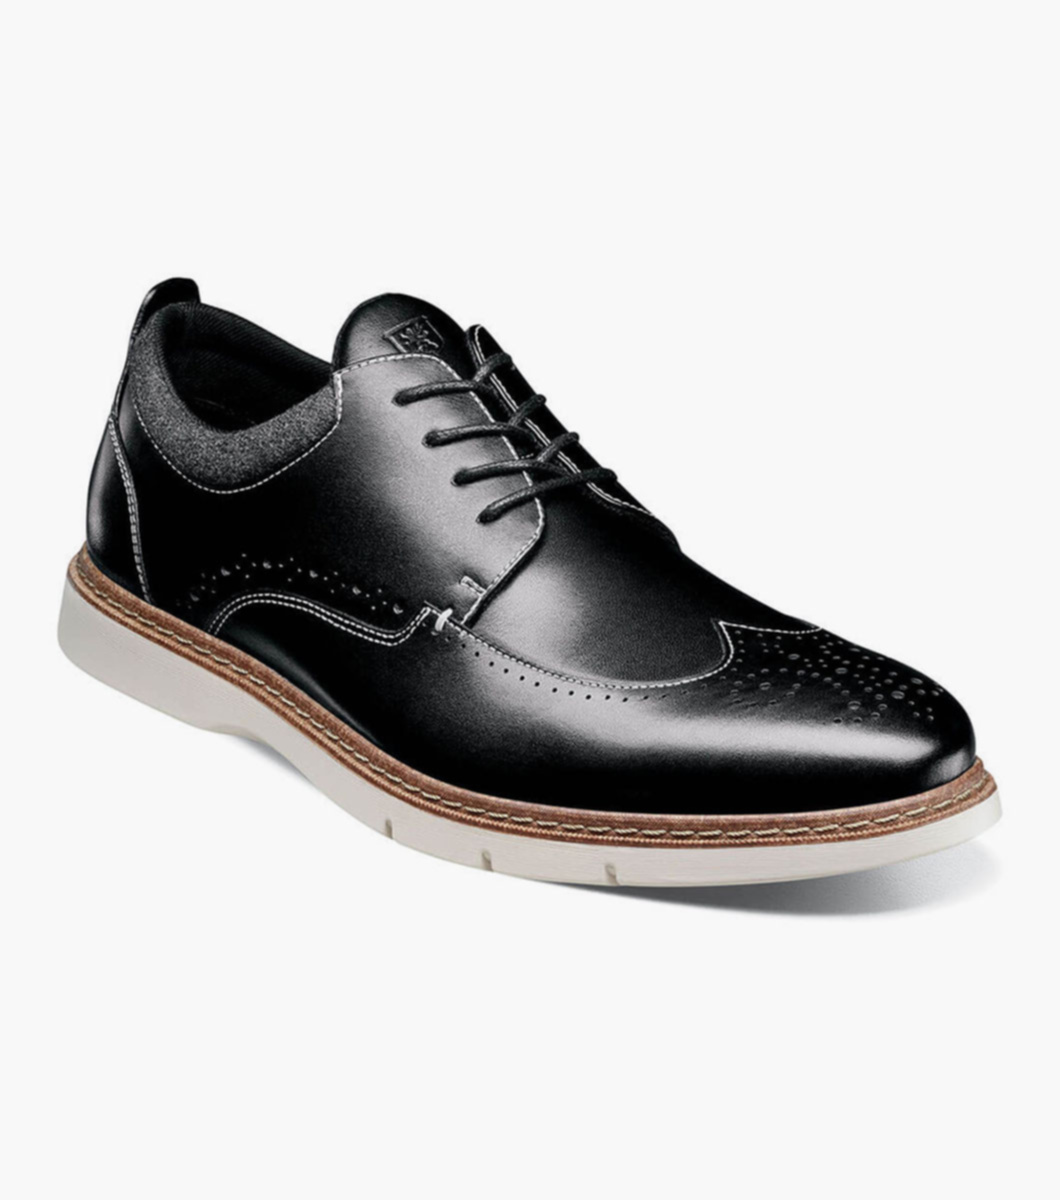 Stacy Adams Shoes – Newman & Co. Consignment